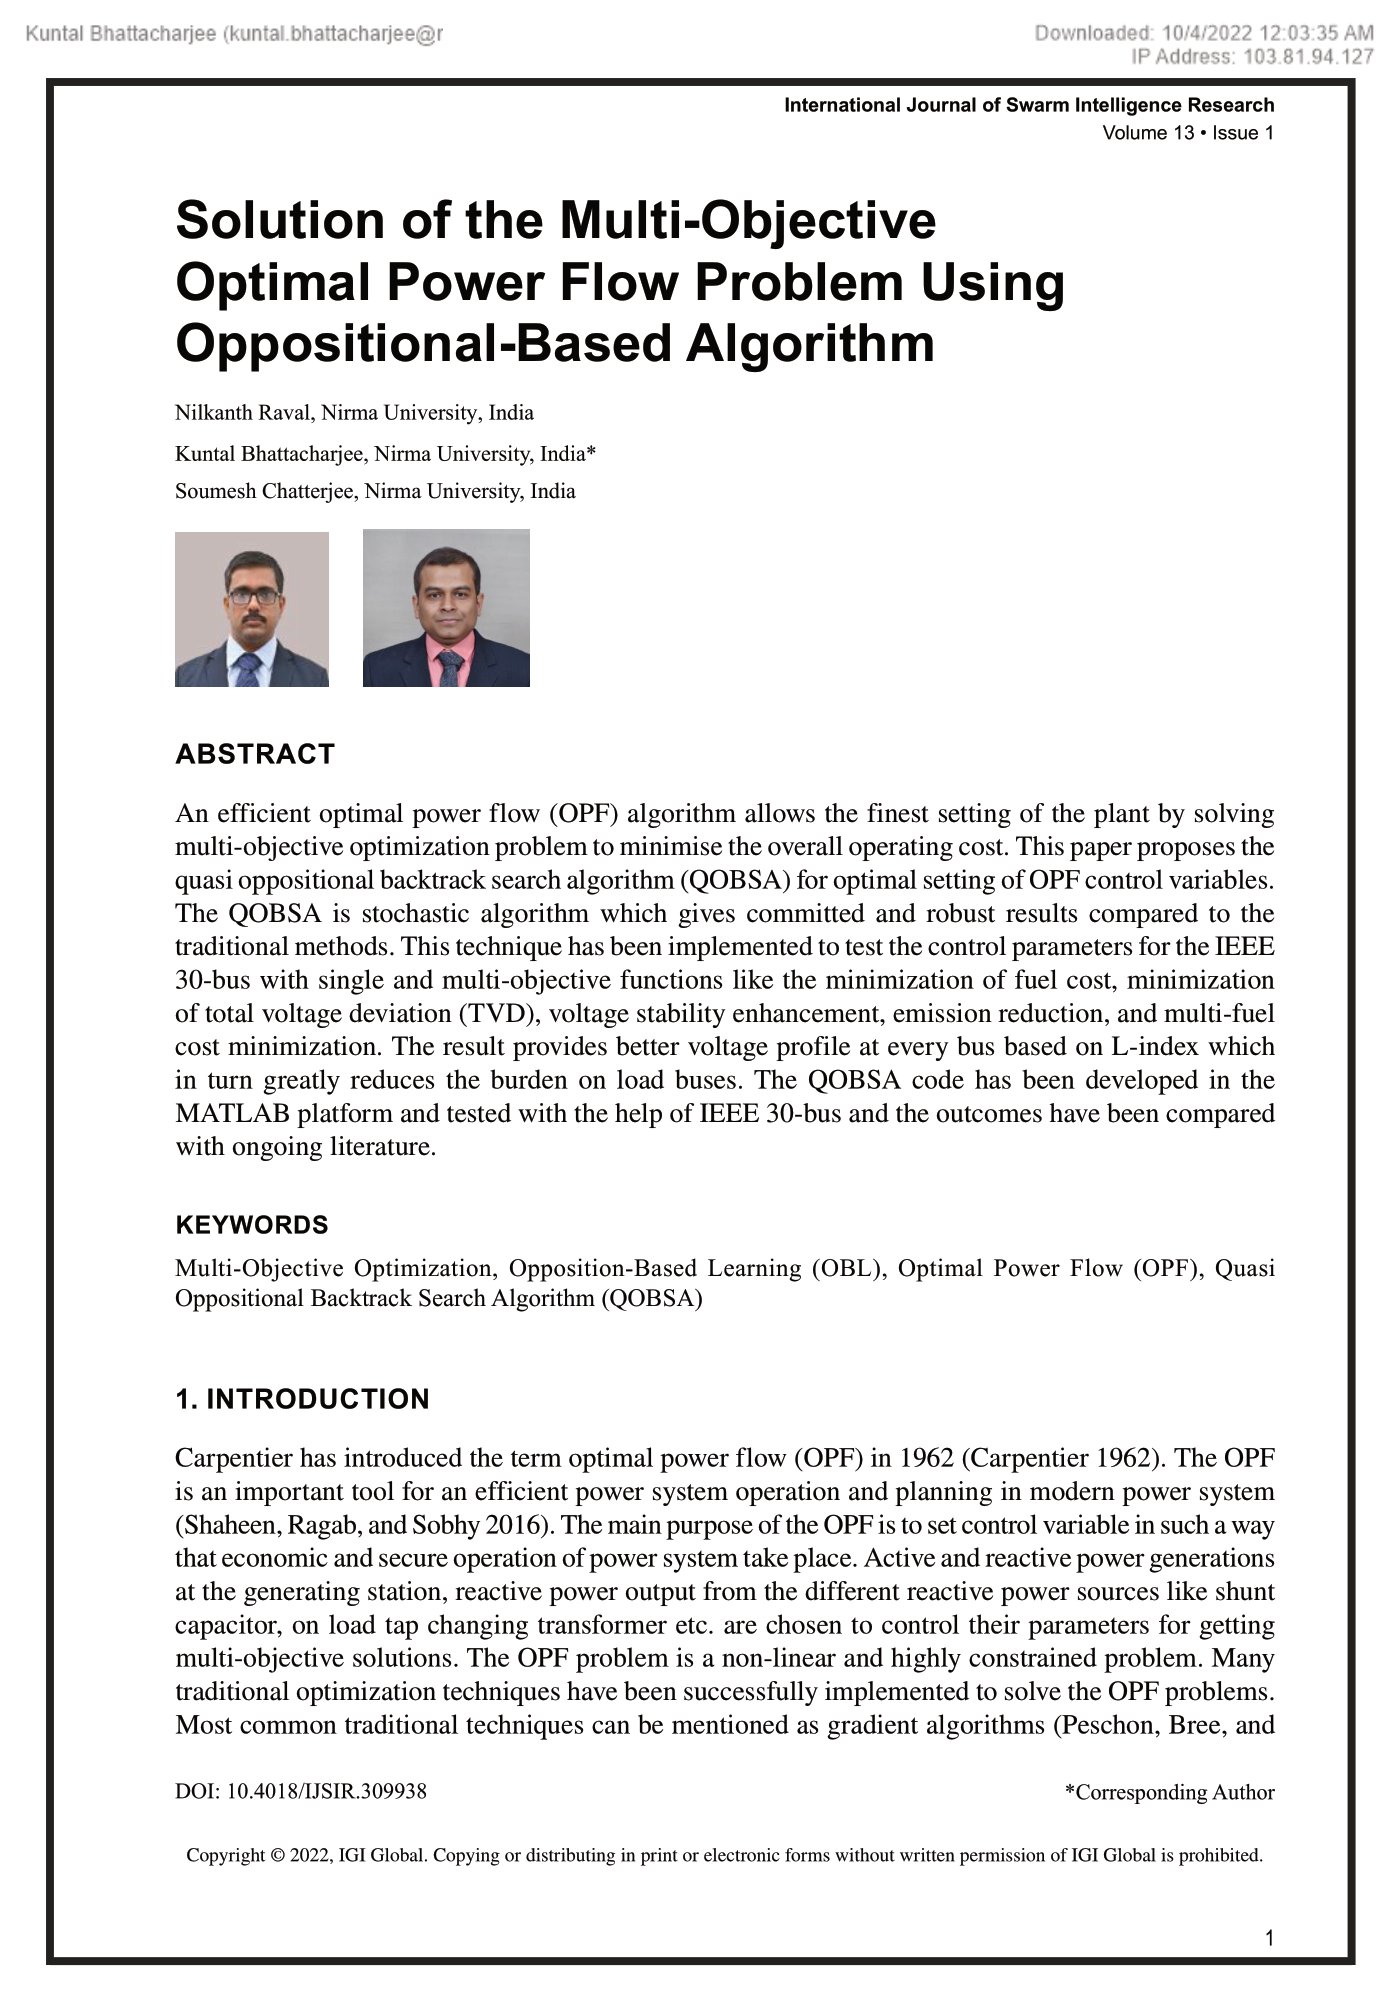 Solution of the Multi-Objective Optimal Power Flow Problem Using Oppositional-Based Algorithm